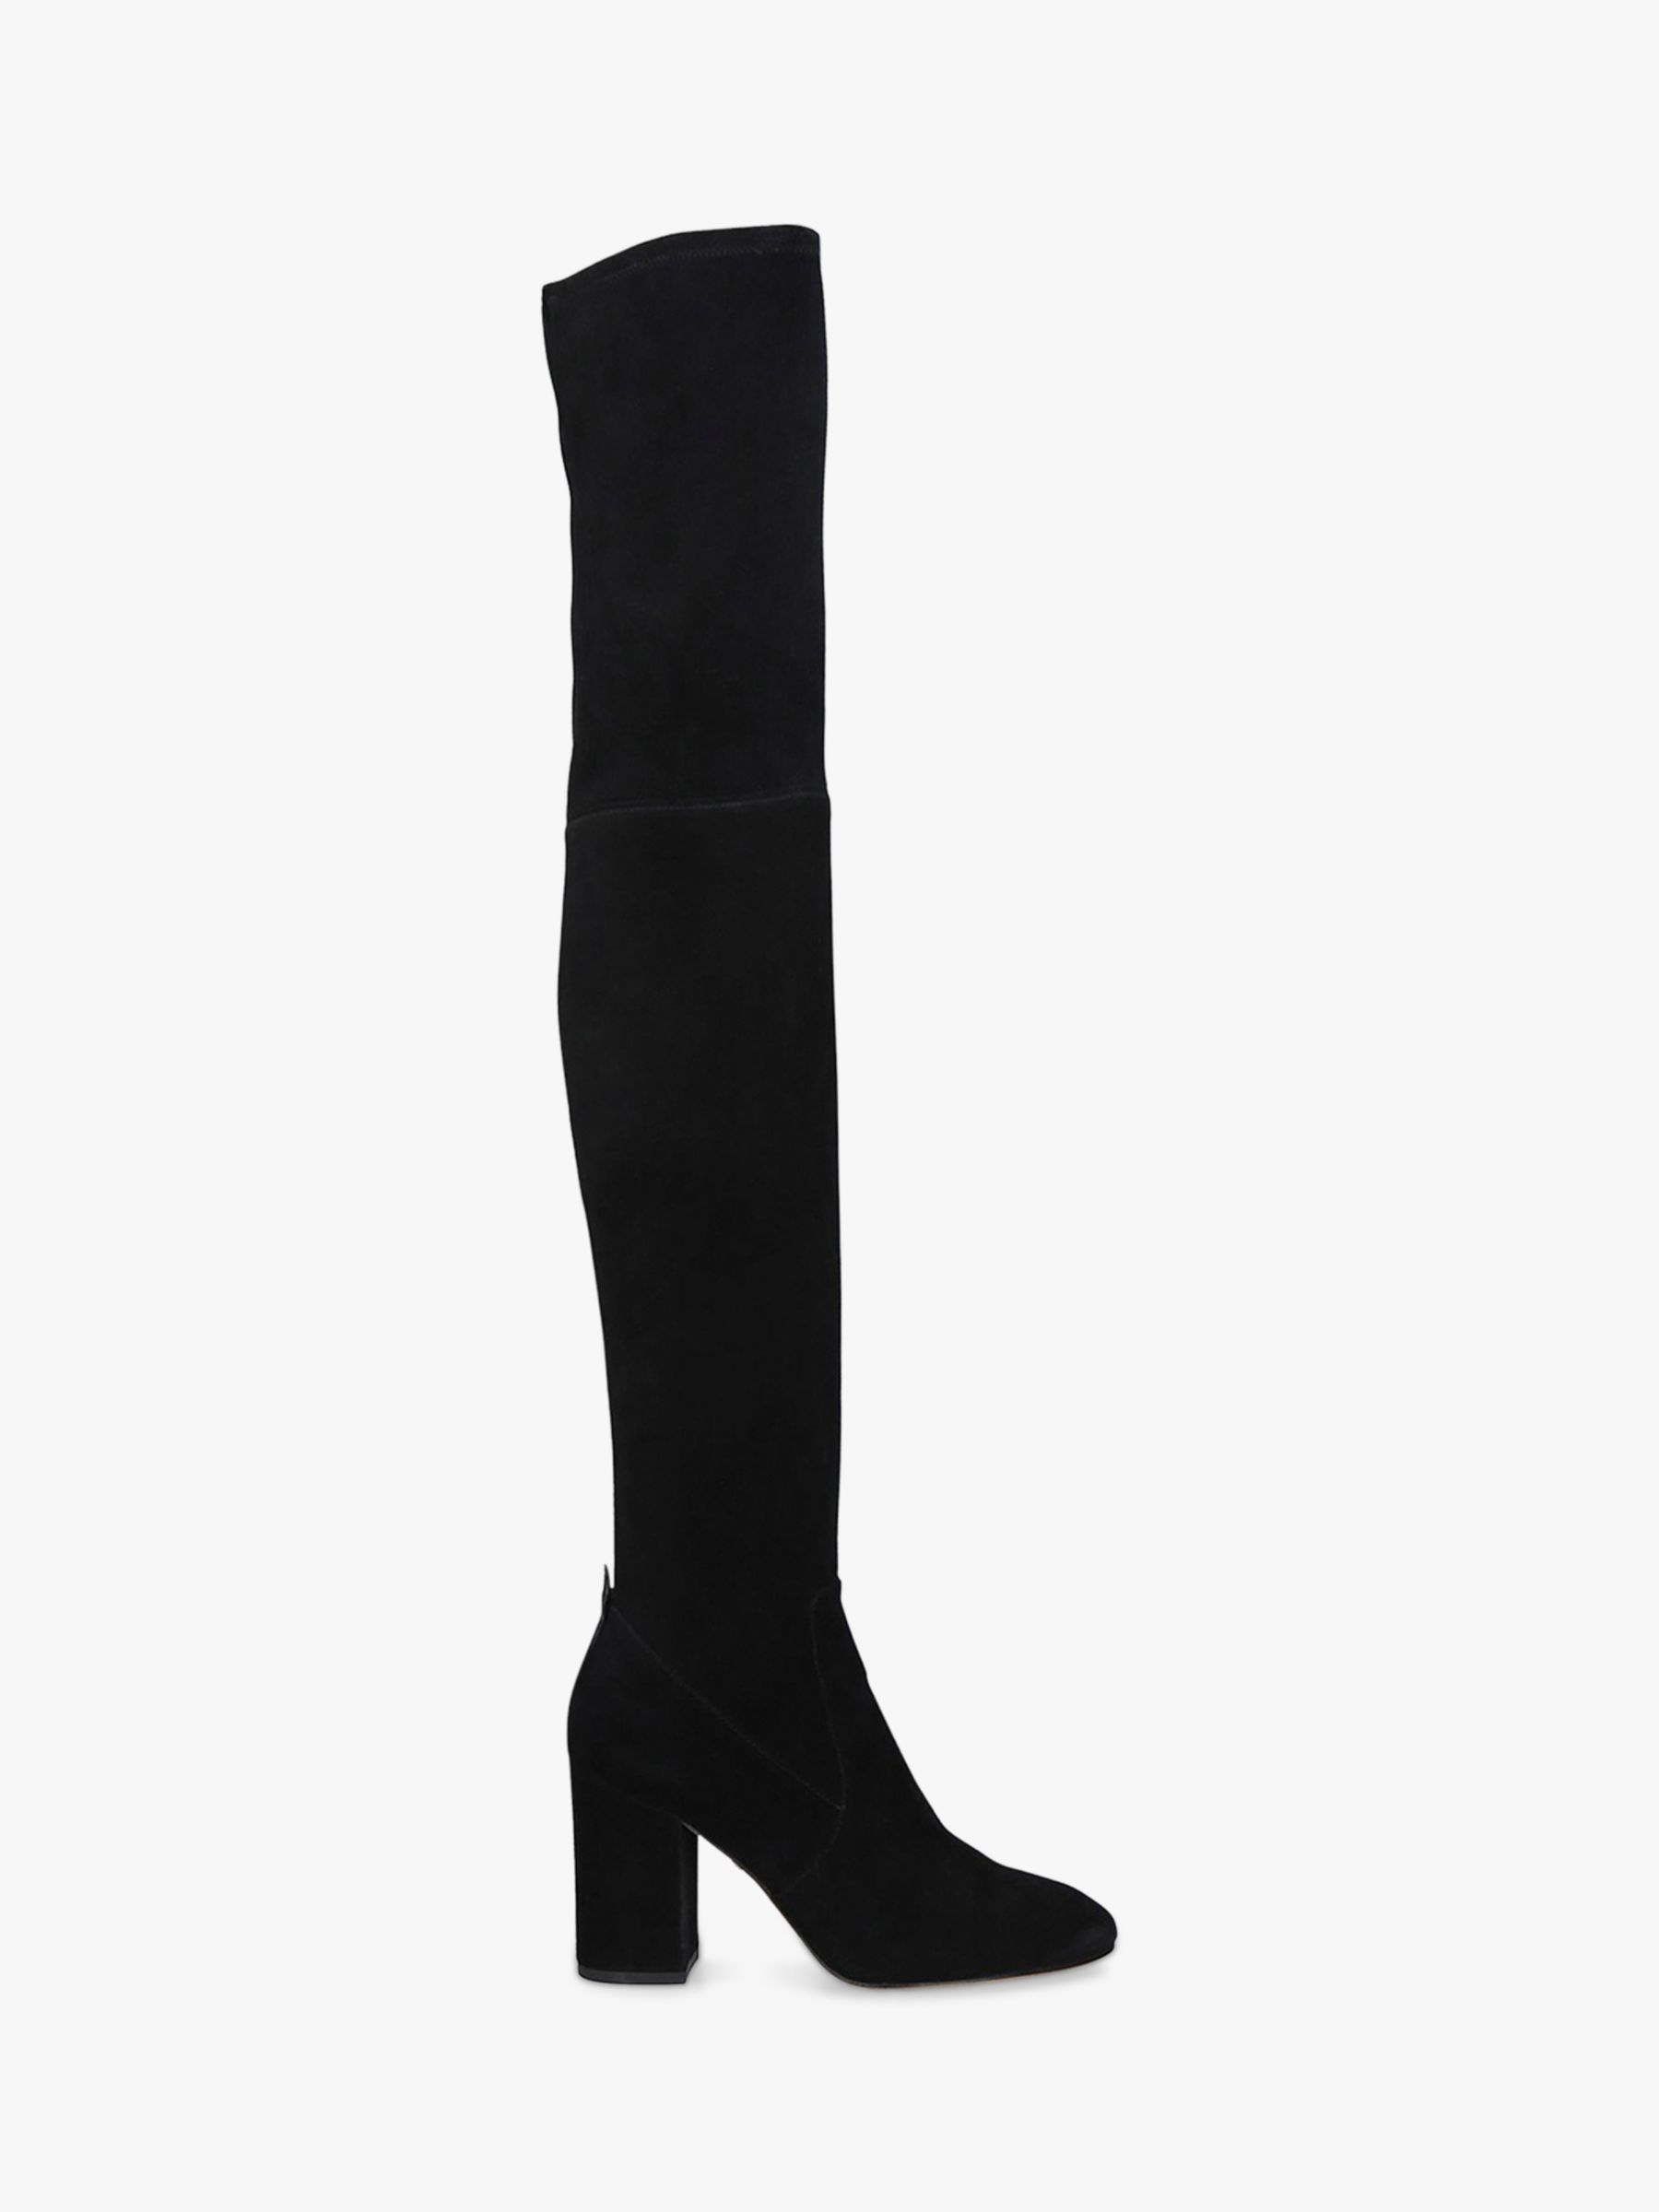 Coach Giselle Over The Knee Block Heel Boots, Black Suede at John Lewis ...